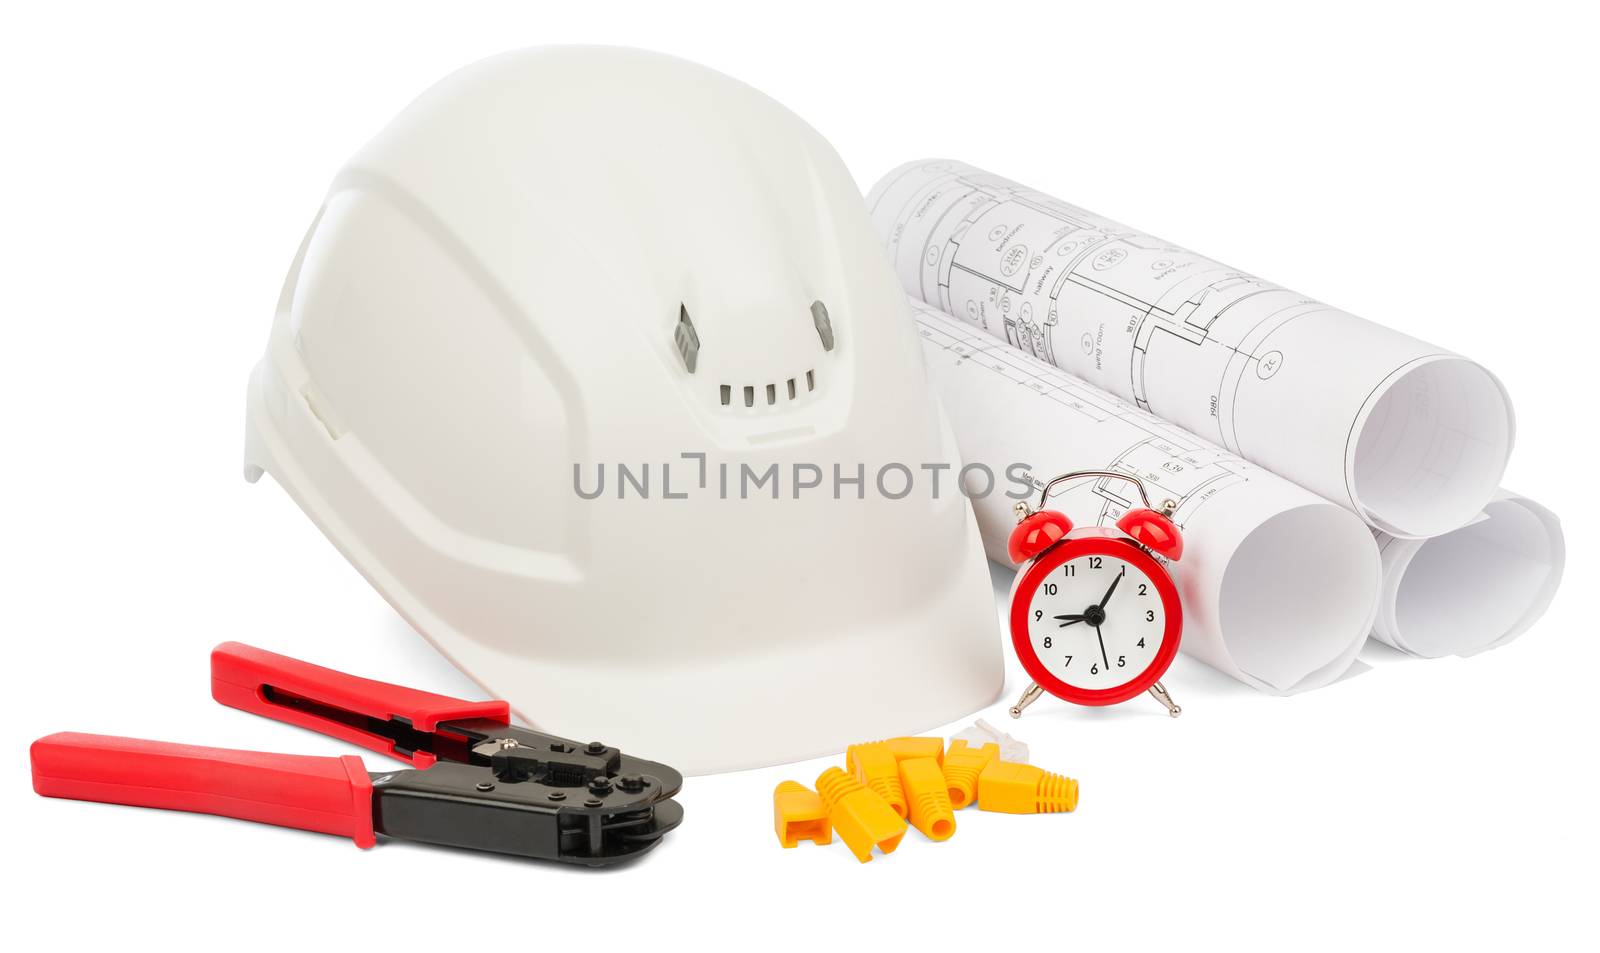 Blueprint rols and helmet with tools on isolated white background